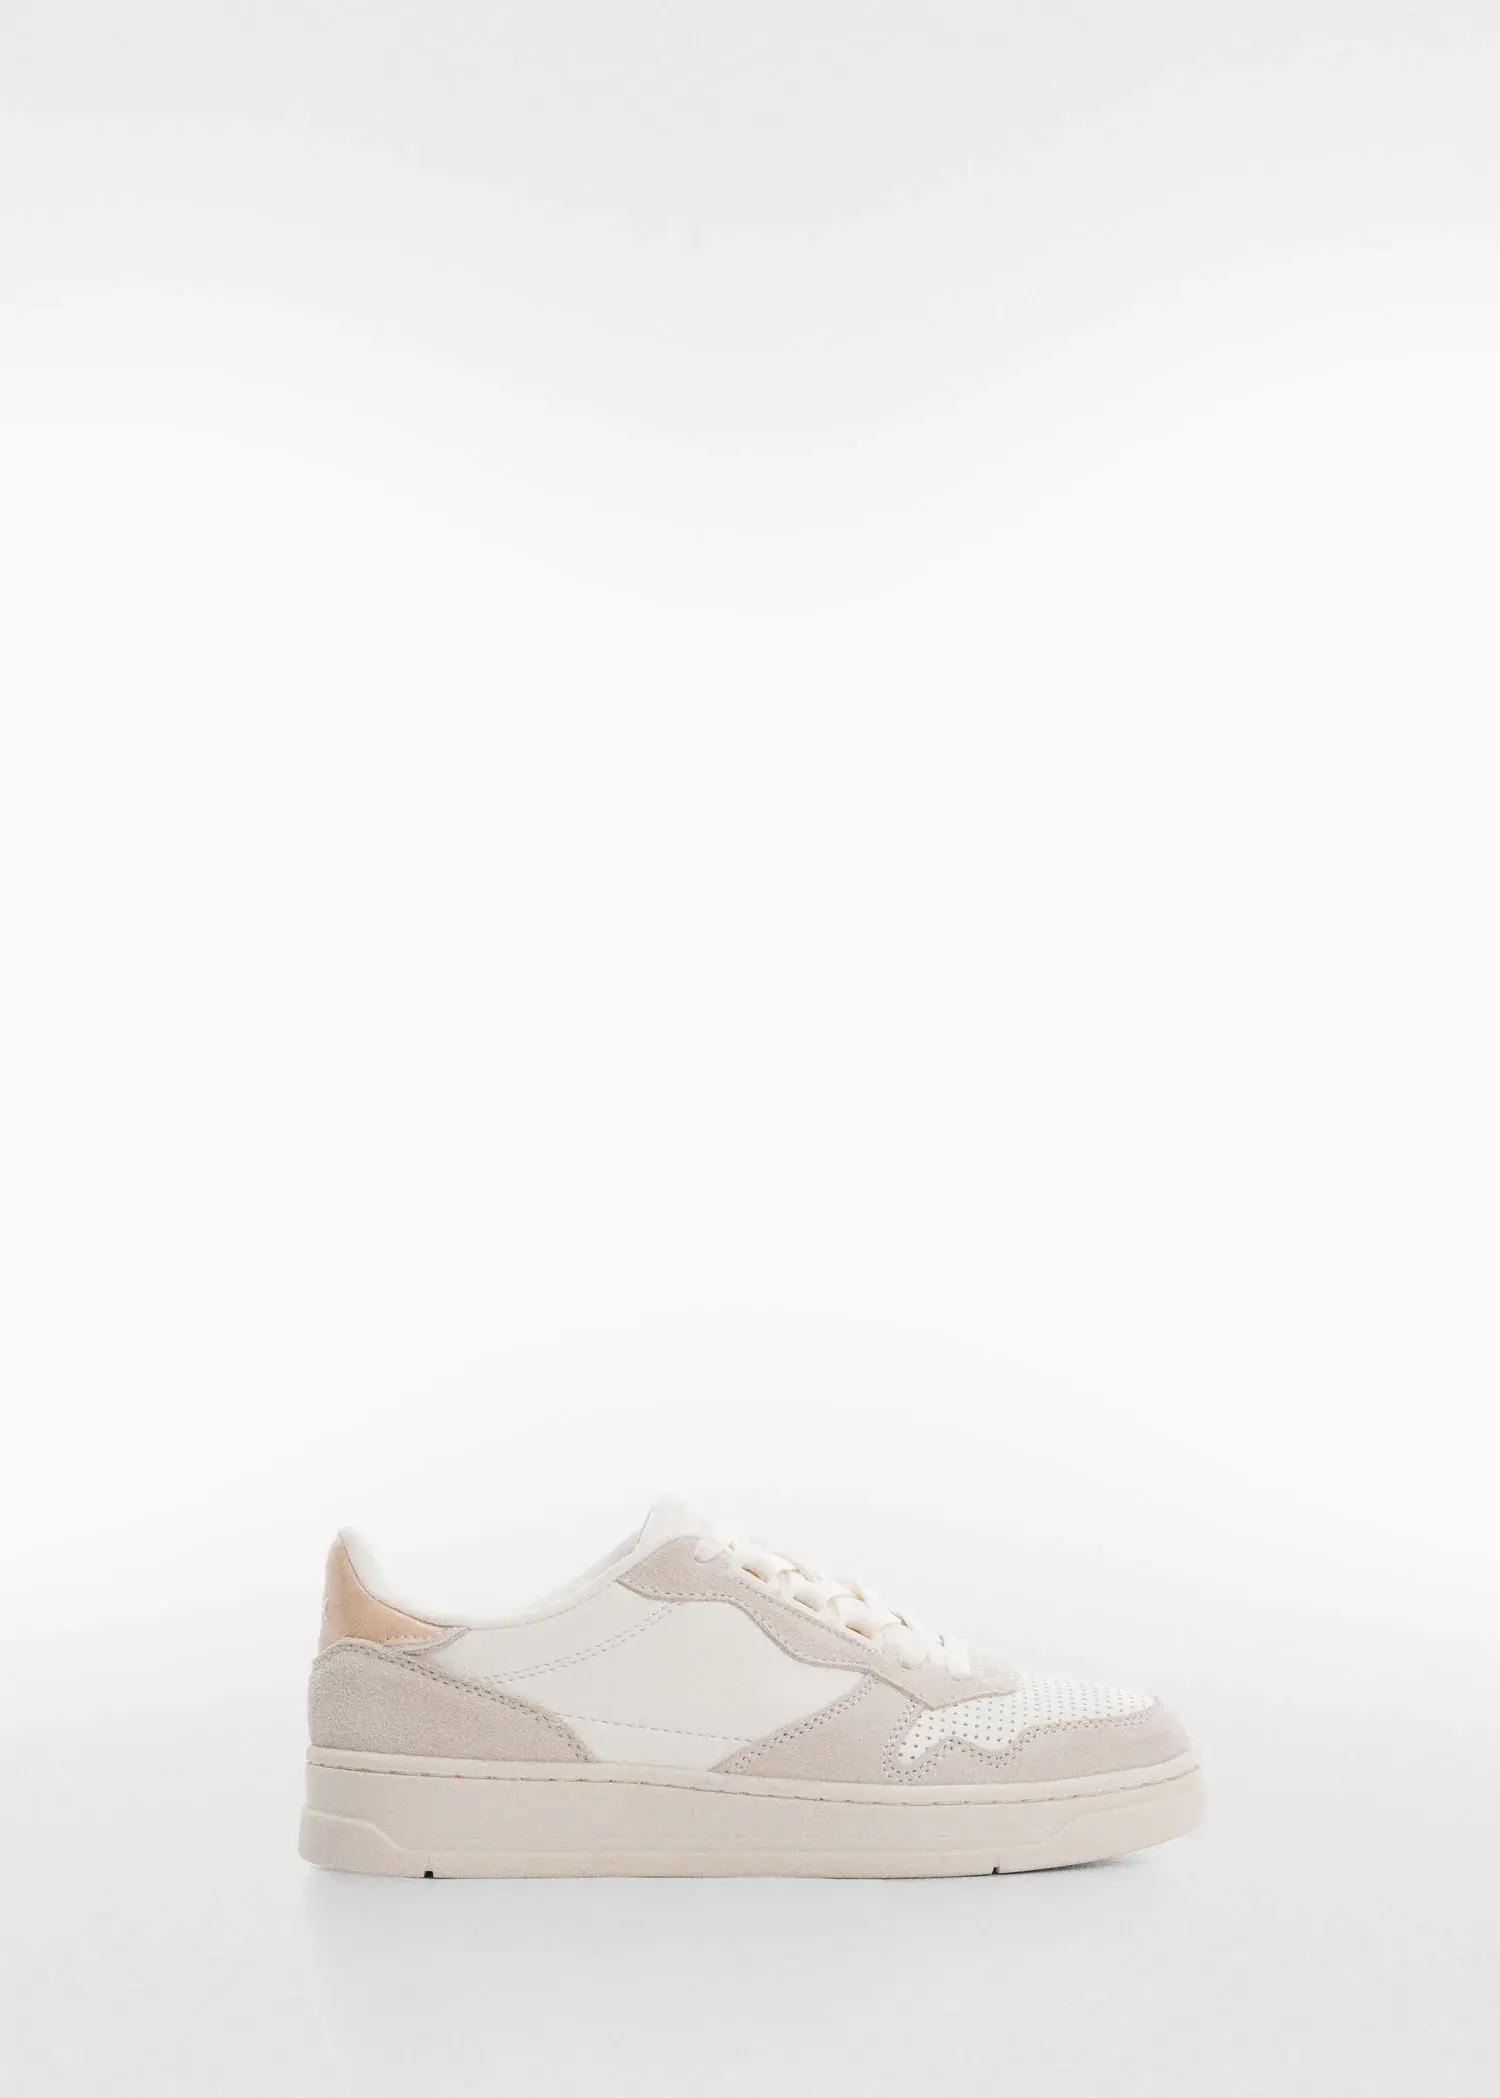 Mango Panels leather sneakers. a pair of white sneakers sitting on top of a white surface. 